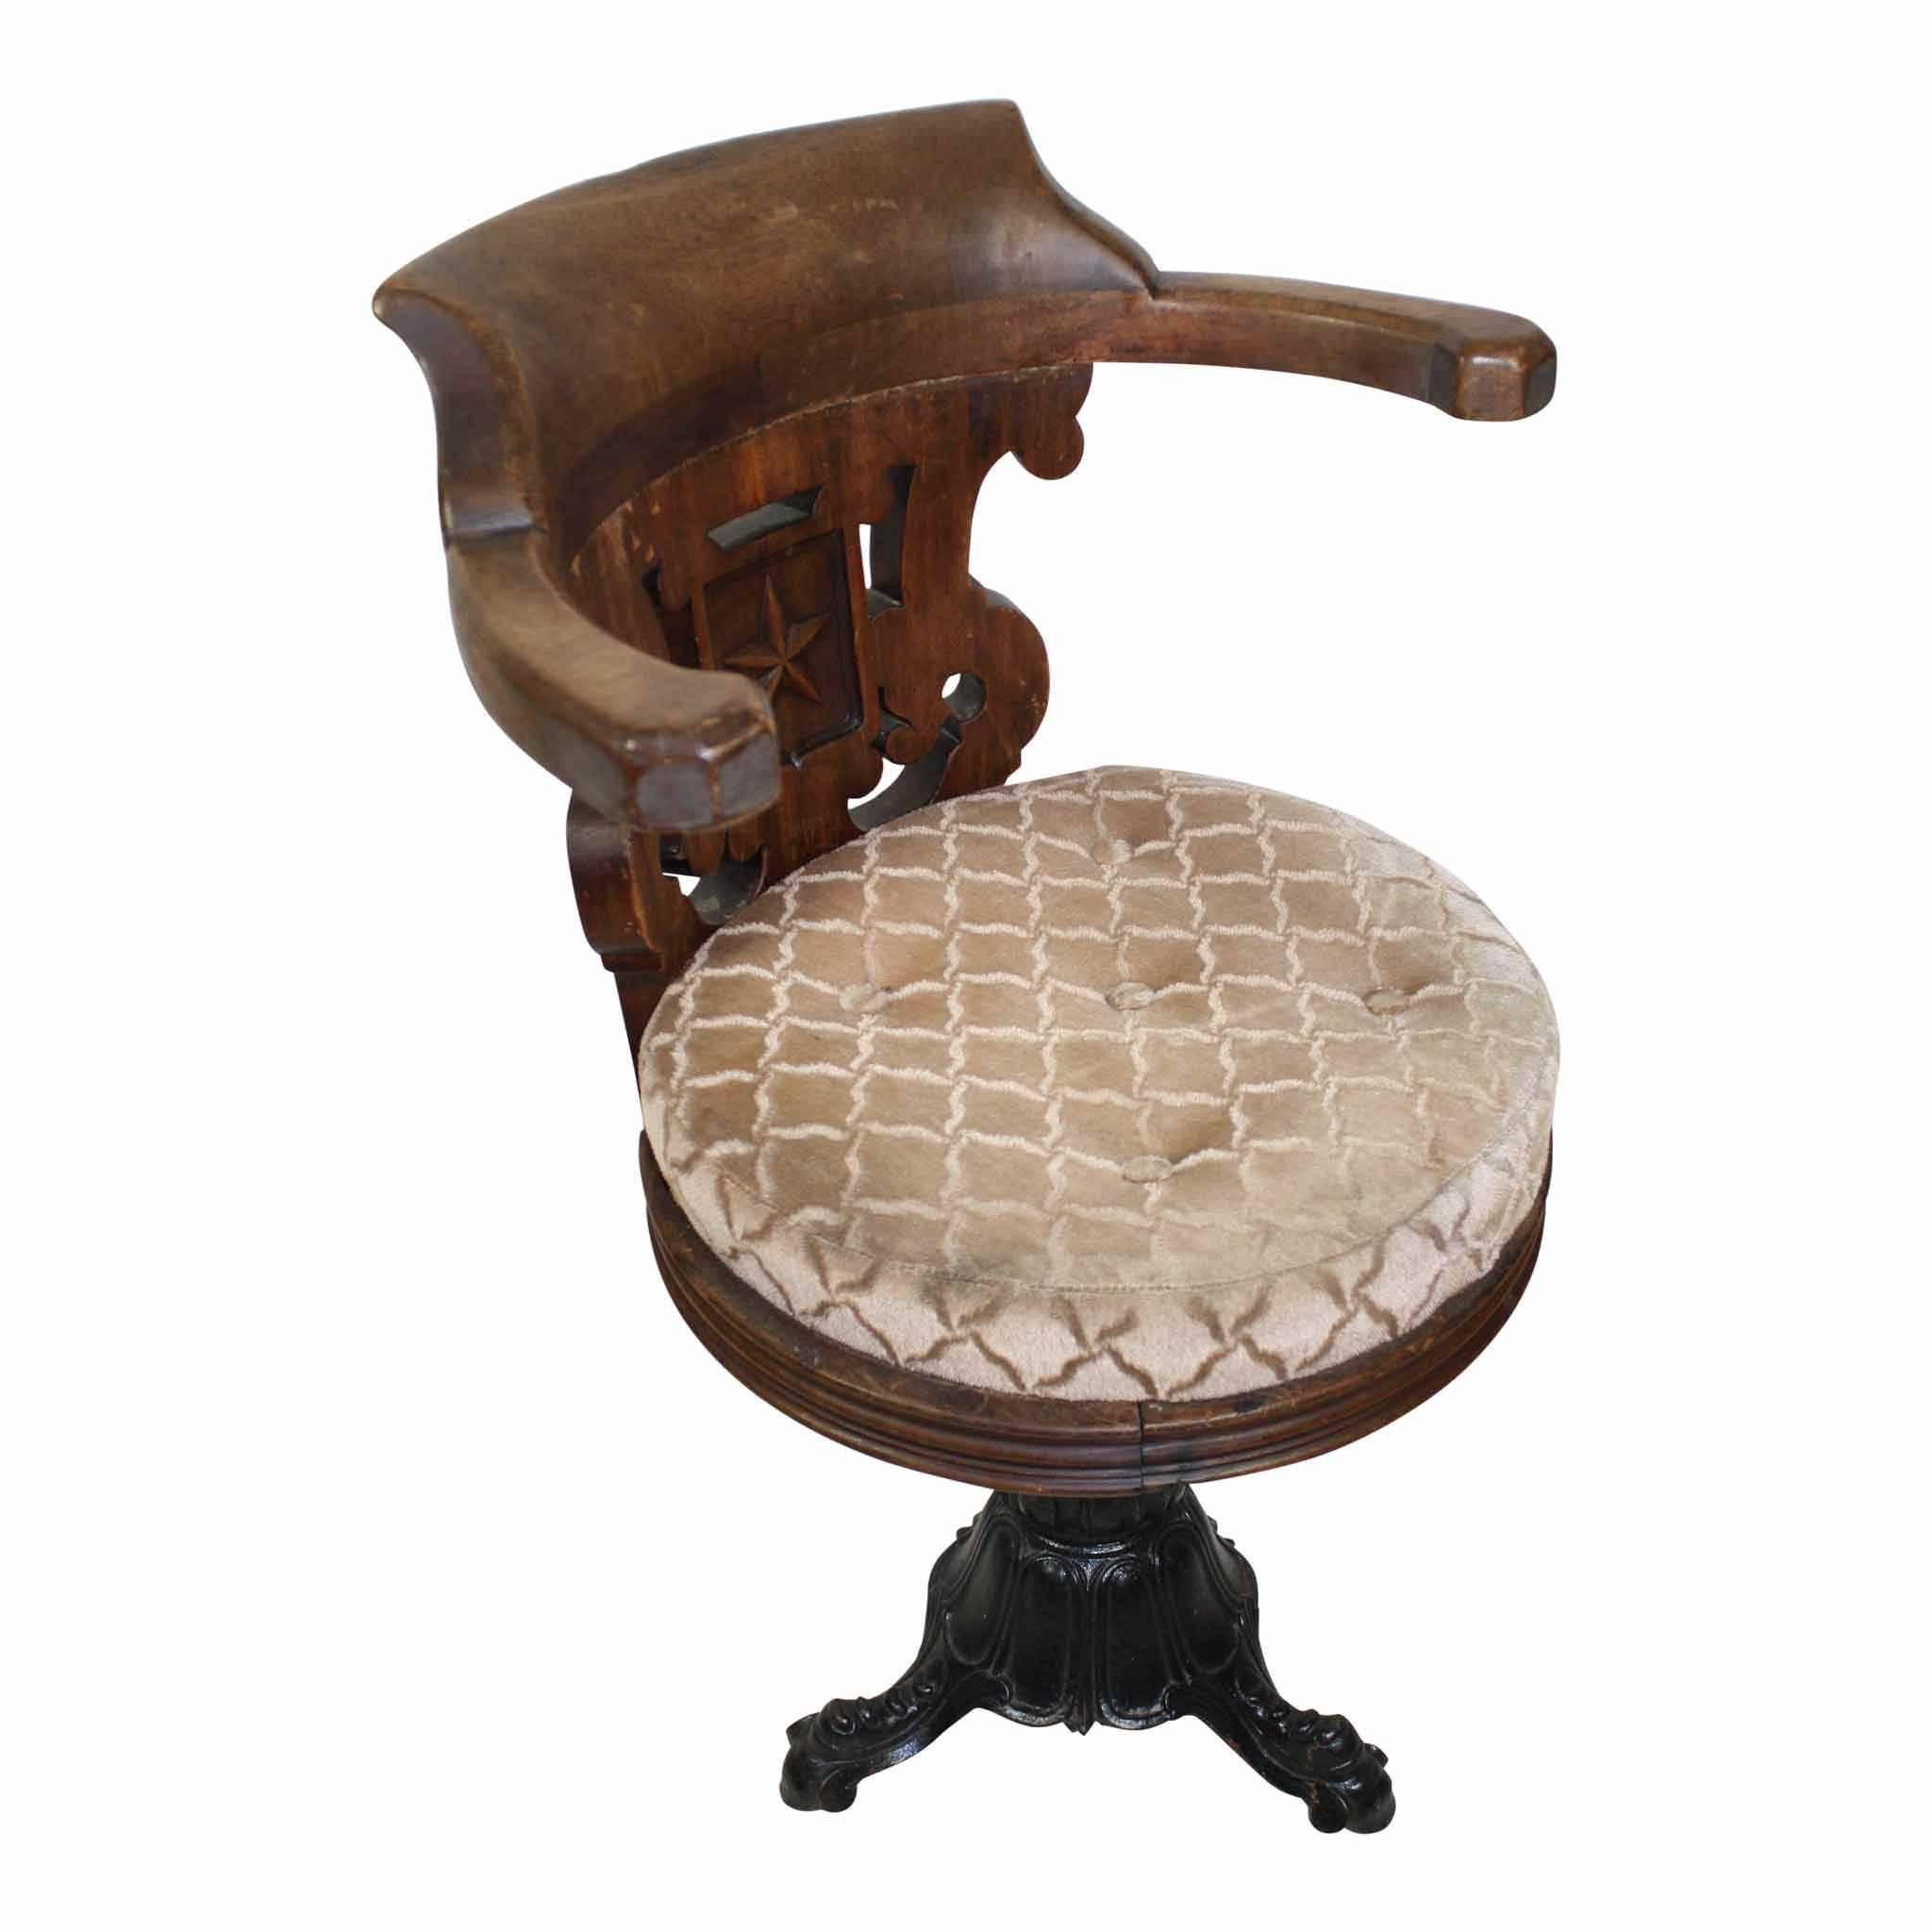 This "captains" style chair has curved, horizontal, raised arms supported only by the back. The chair back has a pierced design with a five point star carved at the centre. The tufted, round seat is upholstered with a light beige fabric.